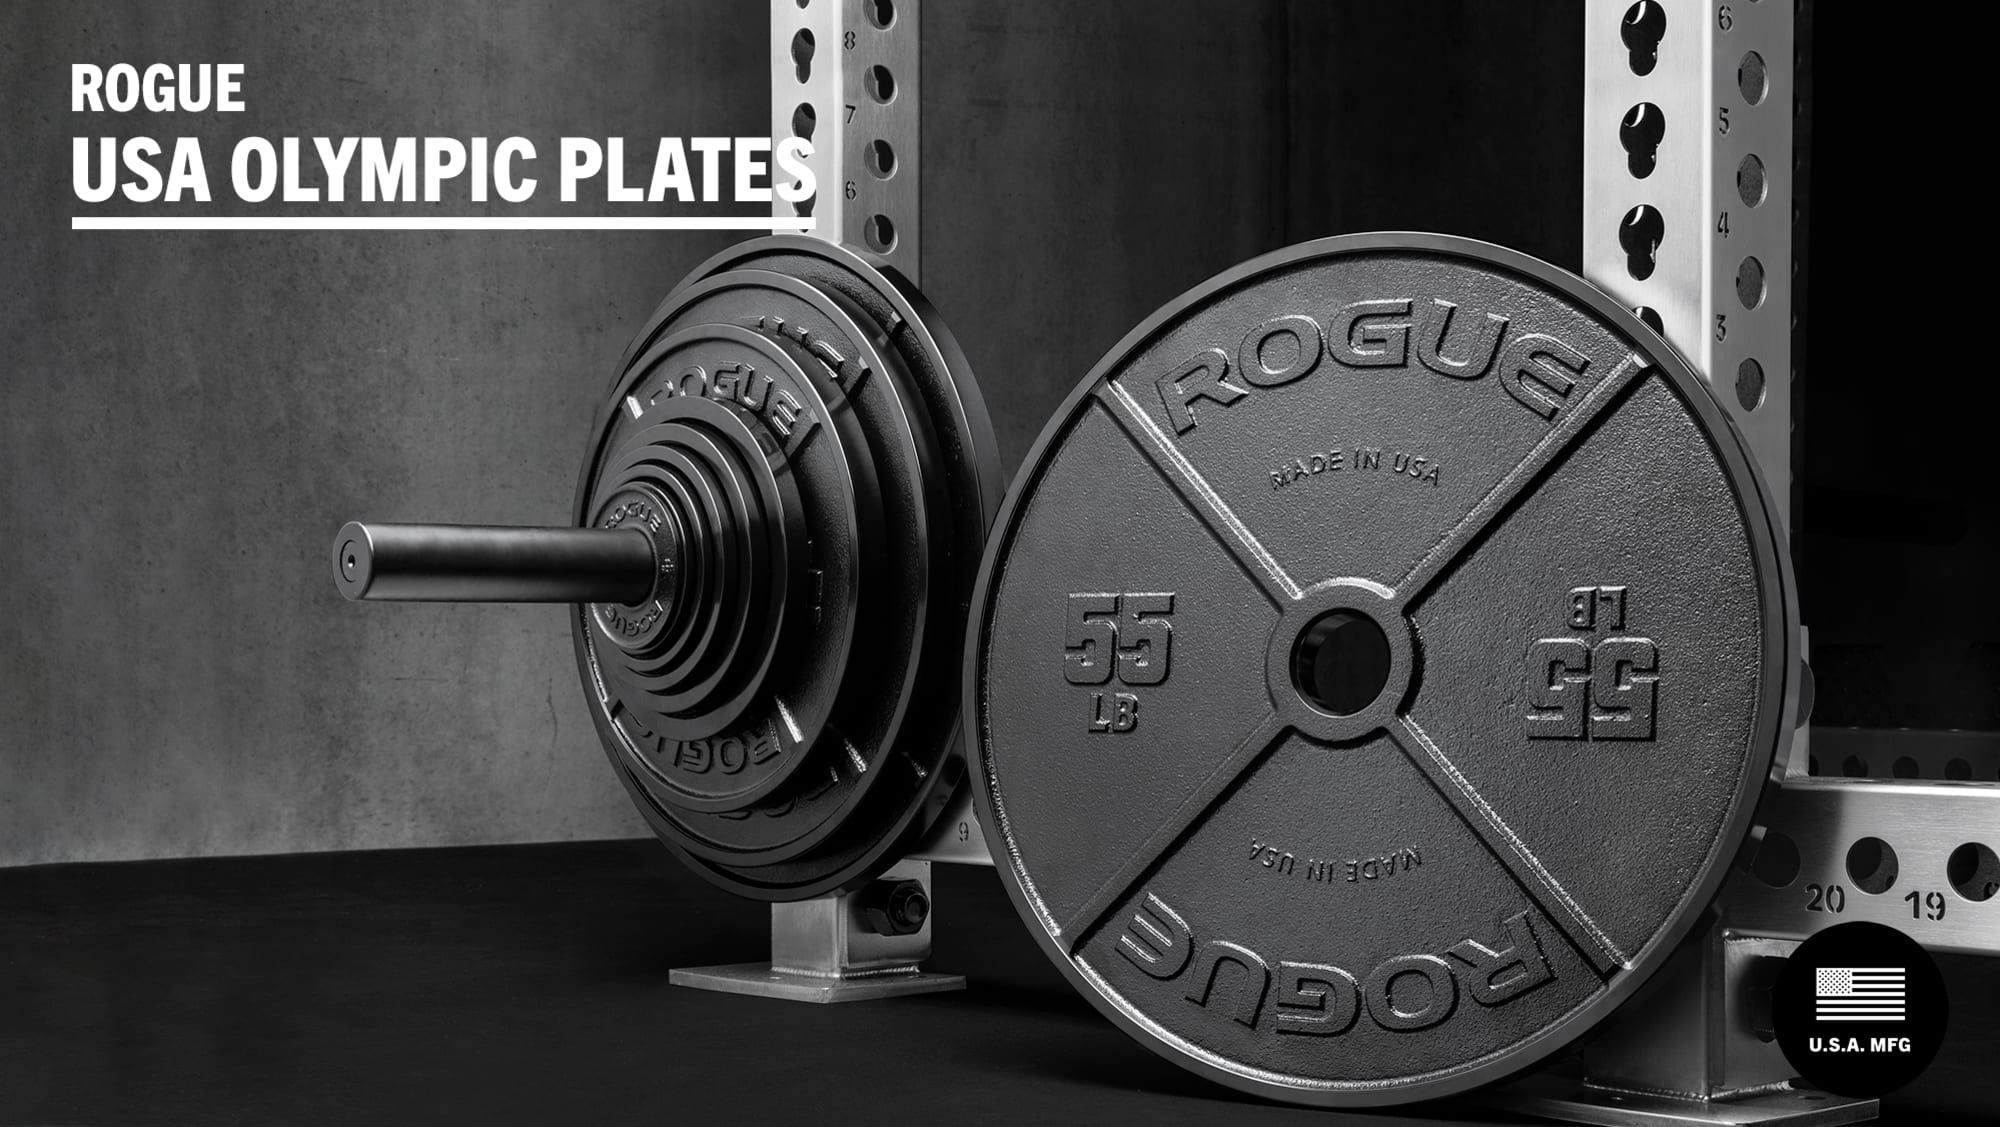 https://assets.roguefitness.com/f_auto,q_auto,c_fill,g_center,w_2000,h_1127,b_rgb:f8f8f8/catalog/Weightlifting%20Bars%20and%20Plates/Plates/Steel%20Plates/USC0005/USC0005-H_vqwr9z.png